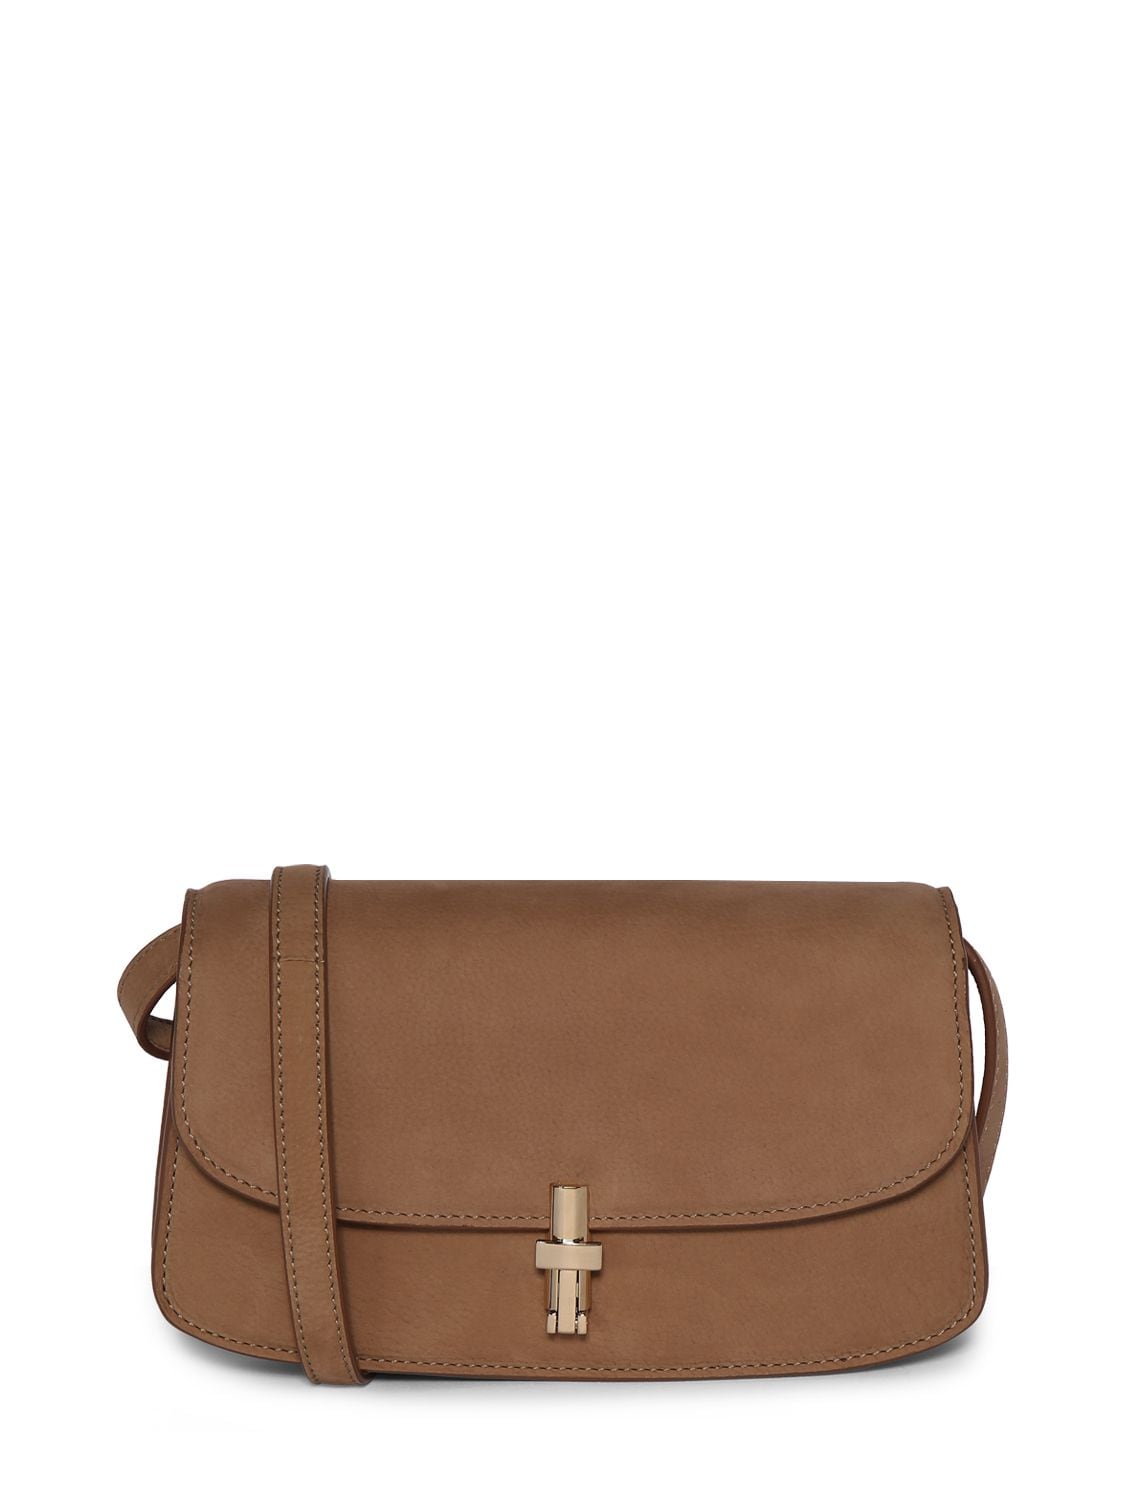 The Row Sofia Suede Shoulder Bag In Tundra Lg